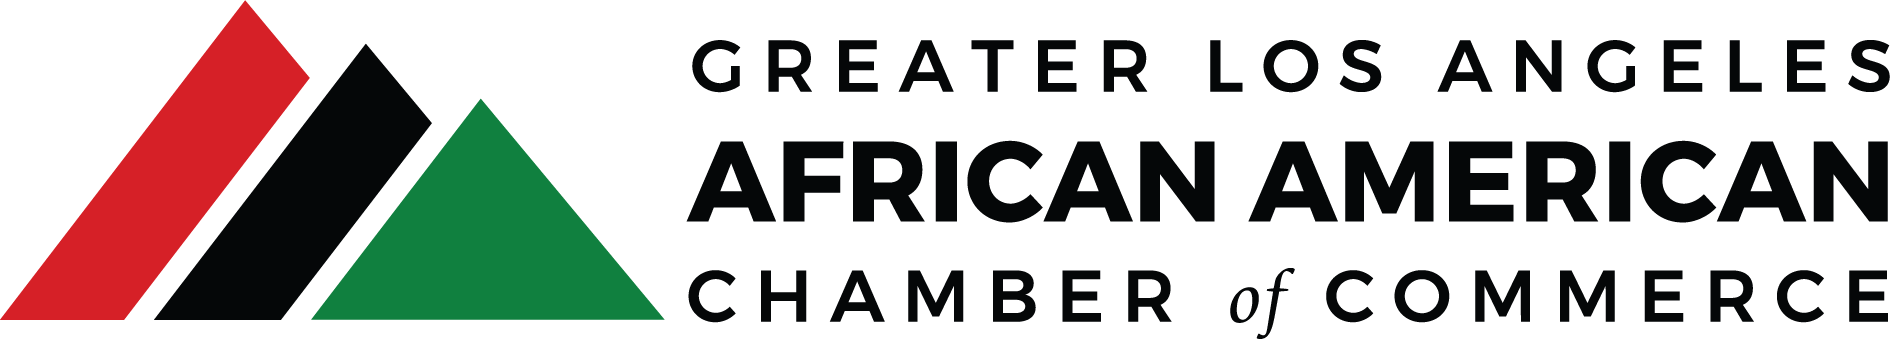 Greater Los Angeles African American Chamber of Commerce (GLAAACC)